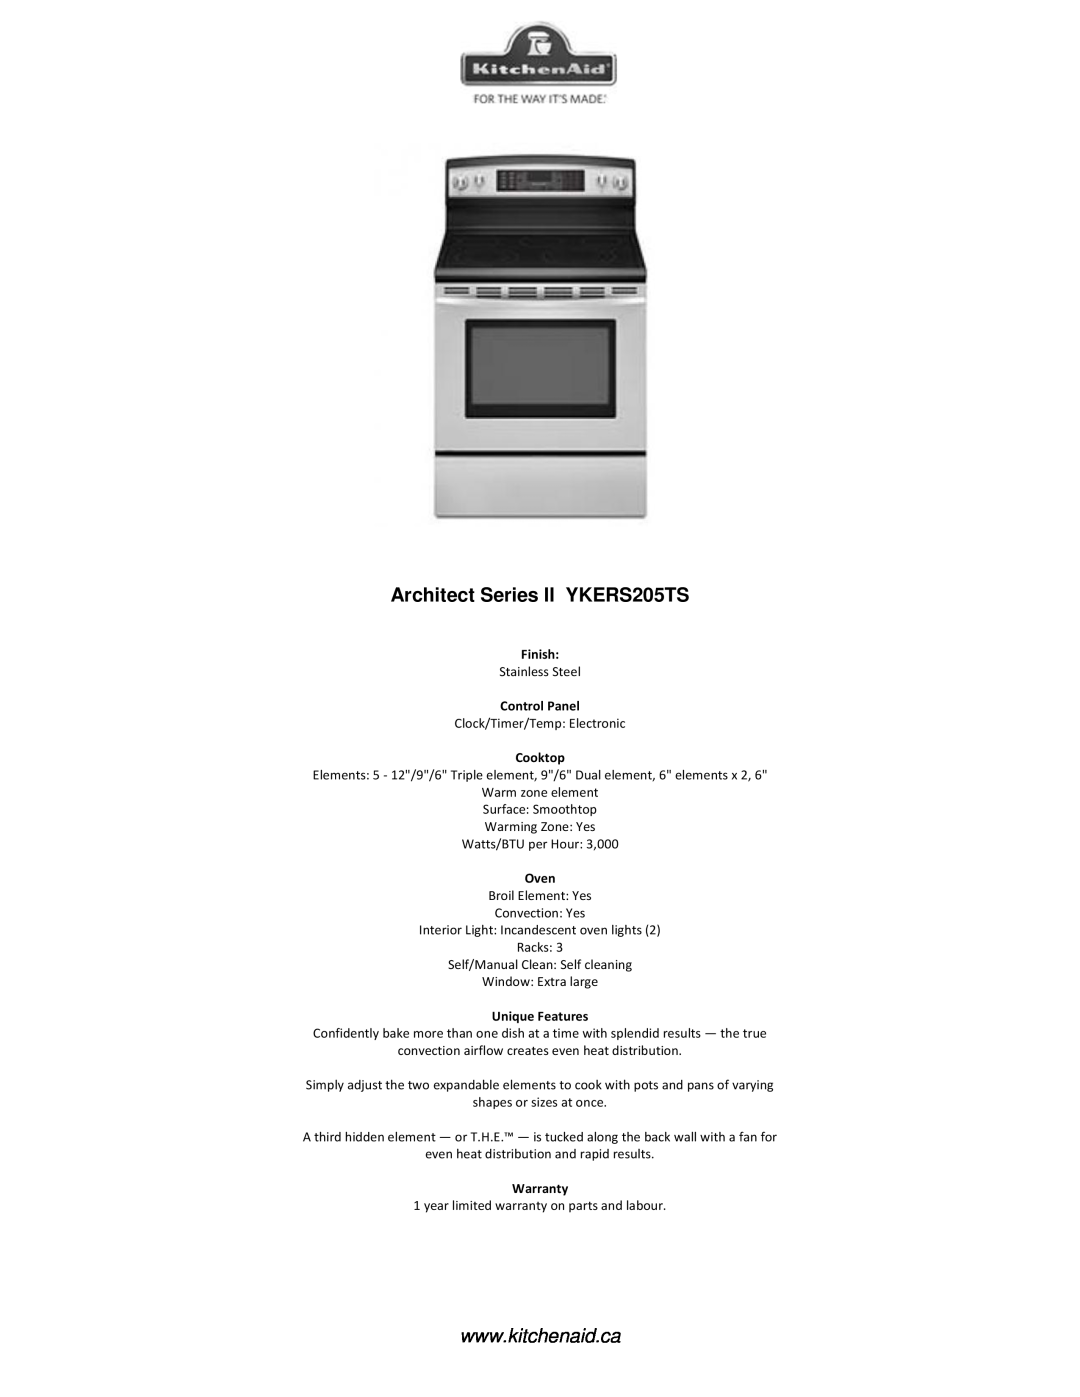 KitchenAid warranty Architect Series II YKERS205TS, Finish, Control Panel, Cooktop, Oven, Unique Features, Warranty 